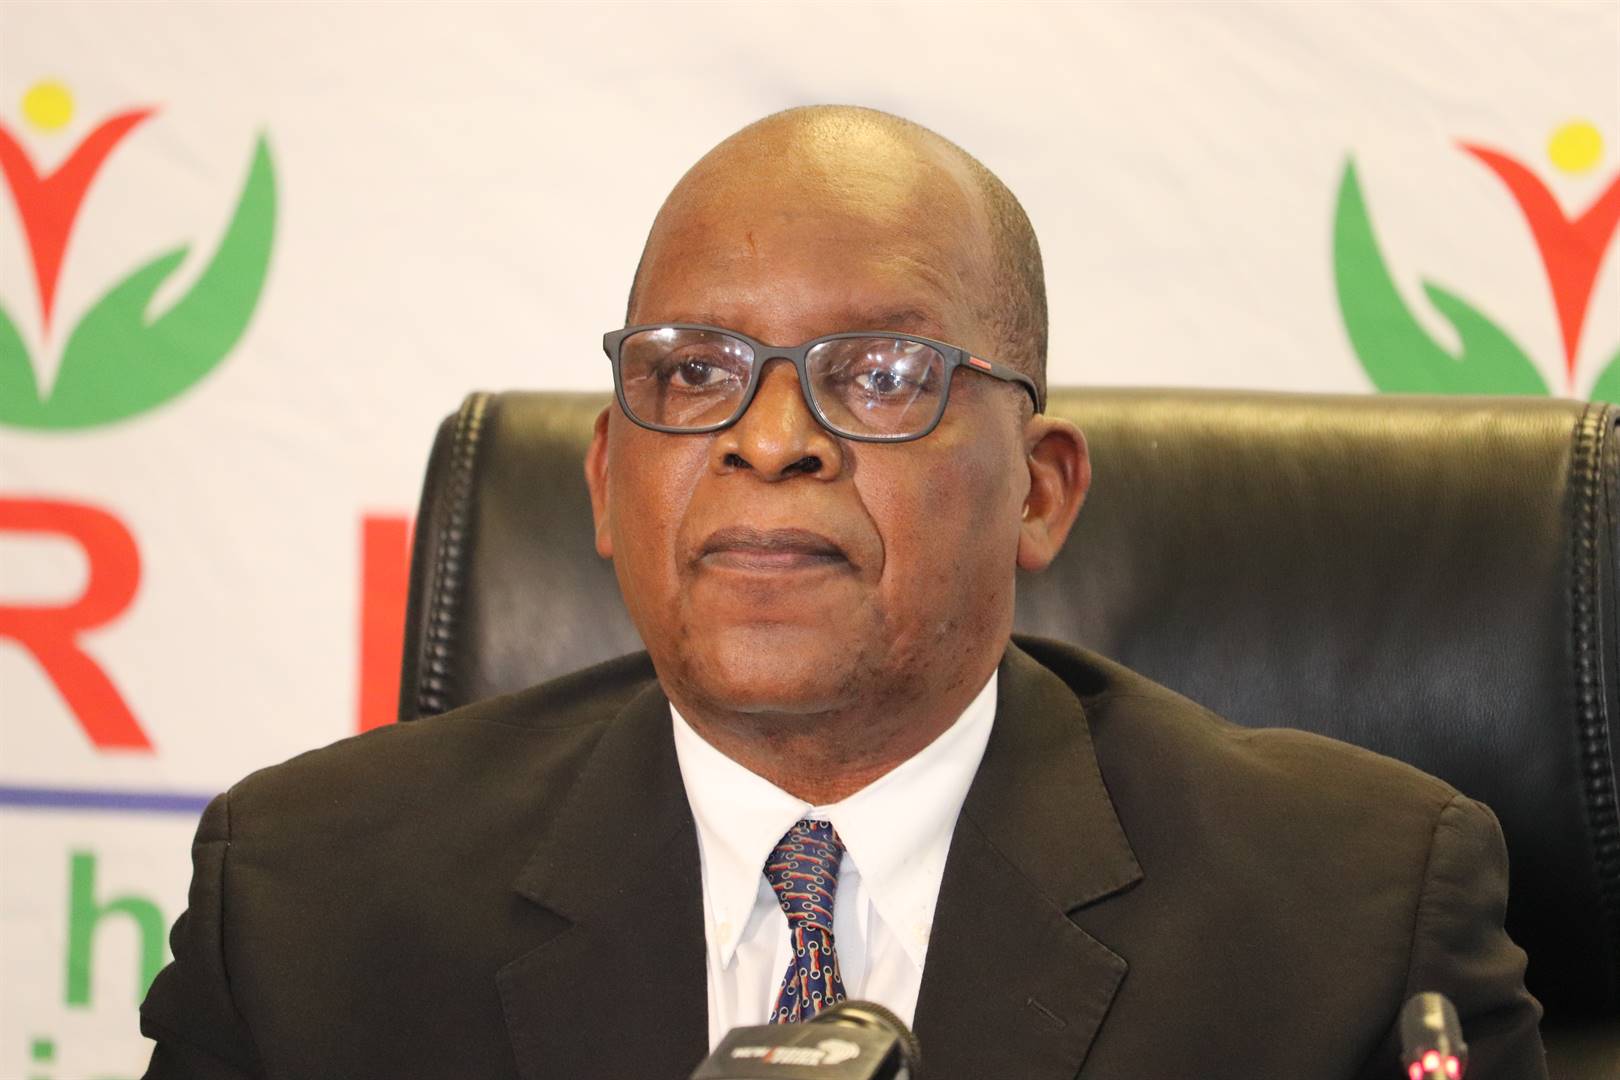 Professor David Luka Mosoma, chairperson of the CRL Rights commission. Picture: City Press